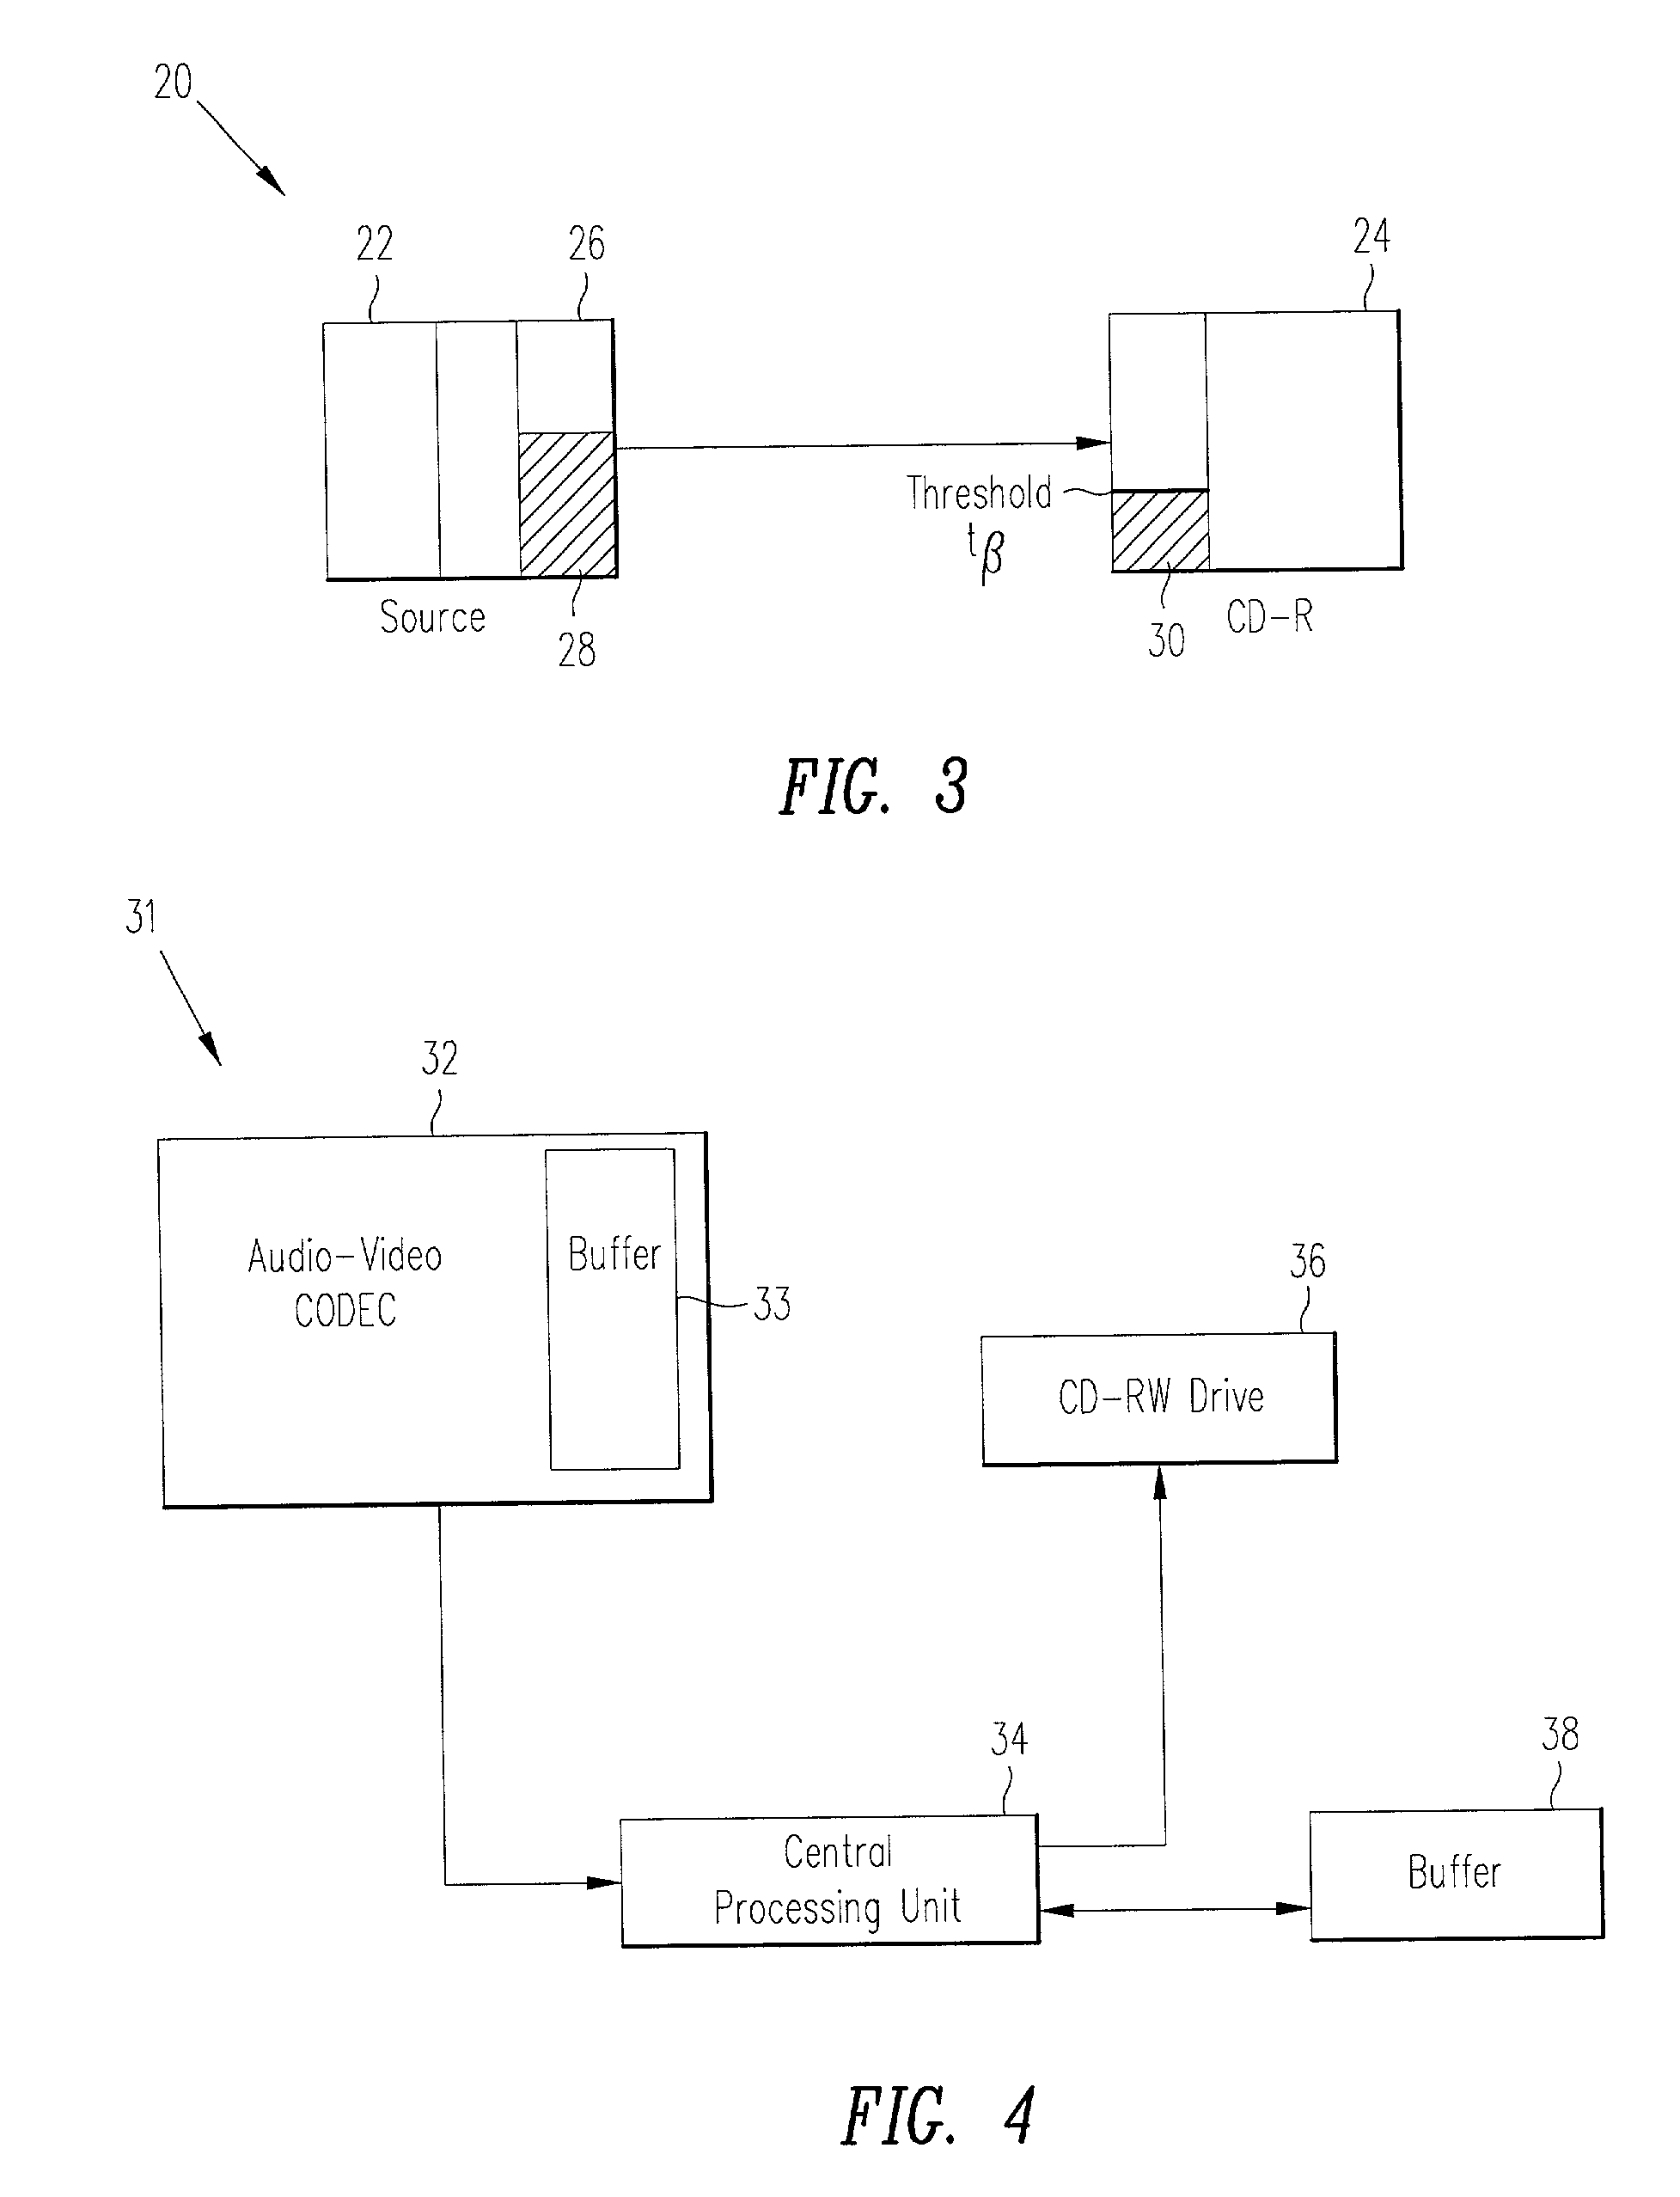 Method and apparatus for recording real-time audio/video information onto recordable compact disc drives